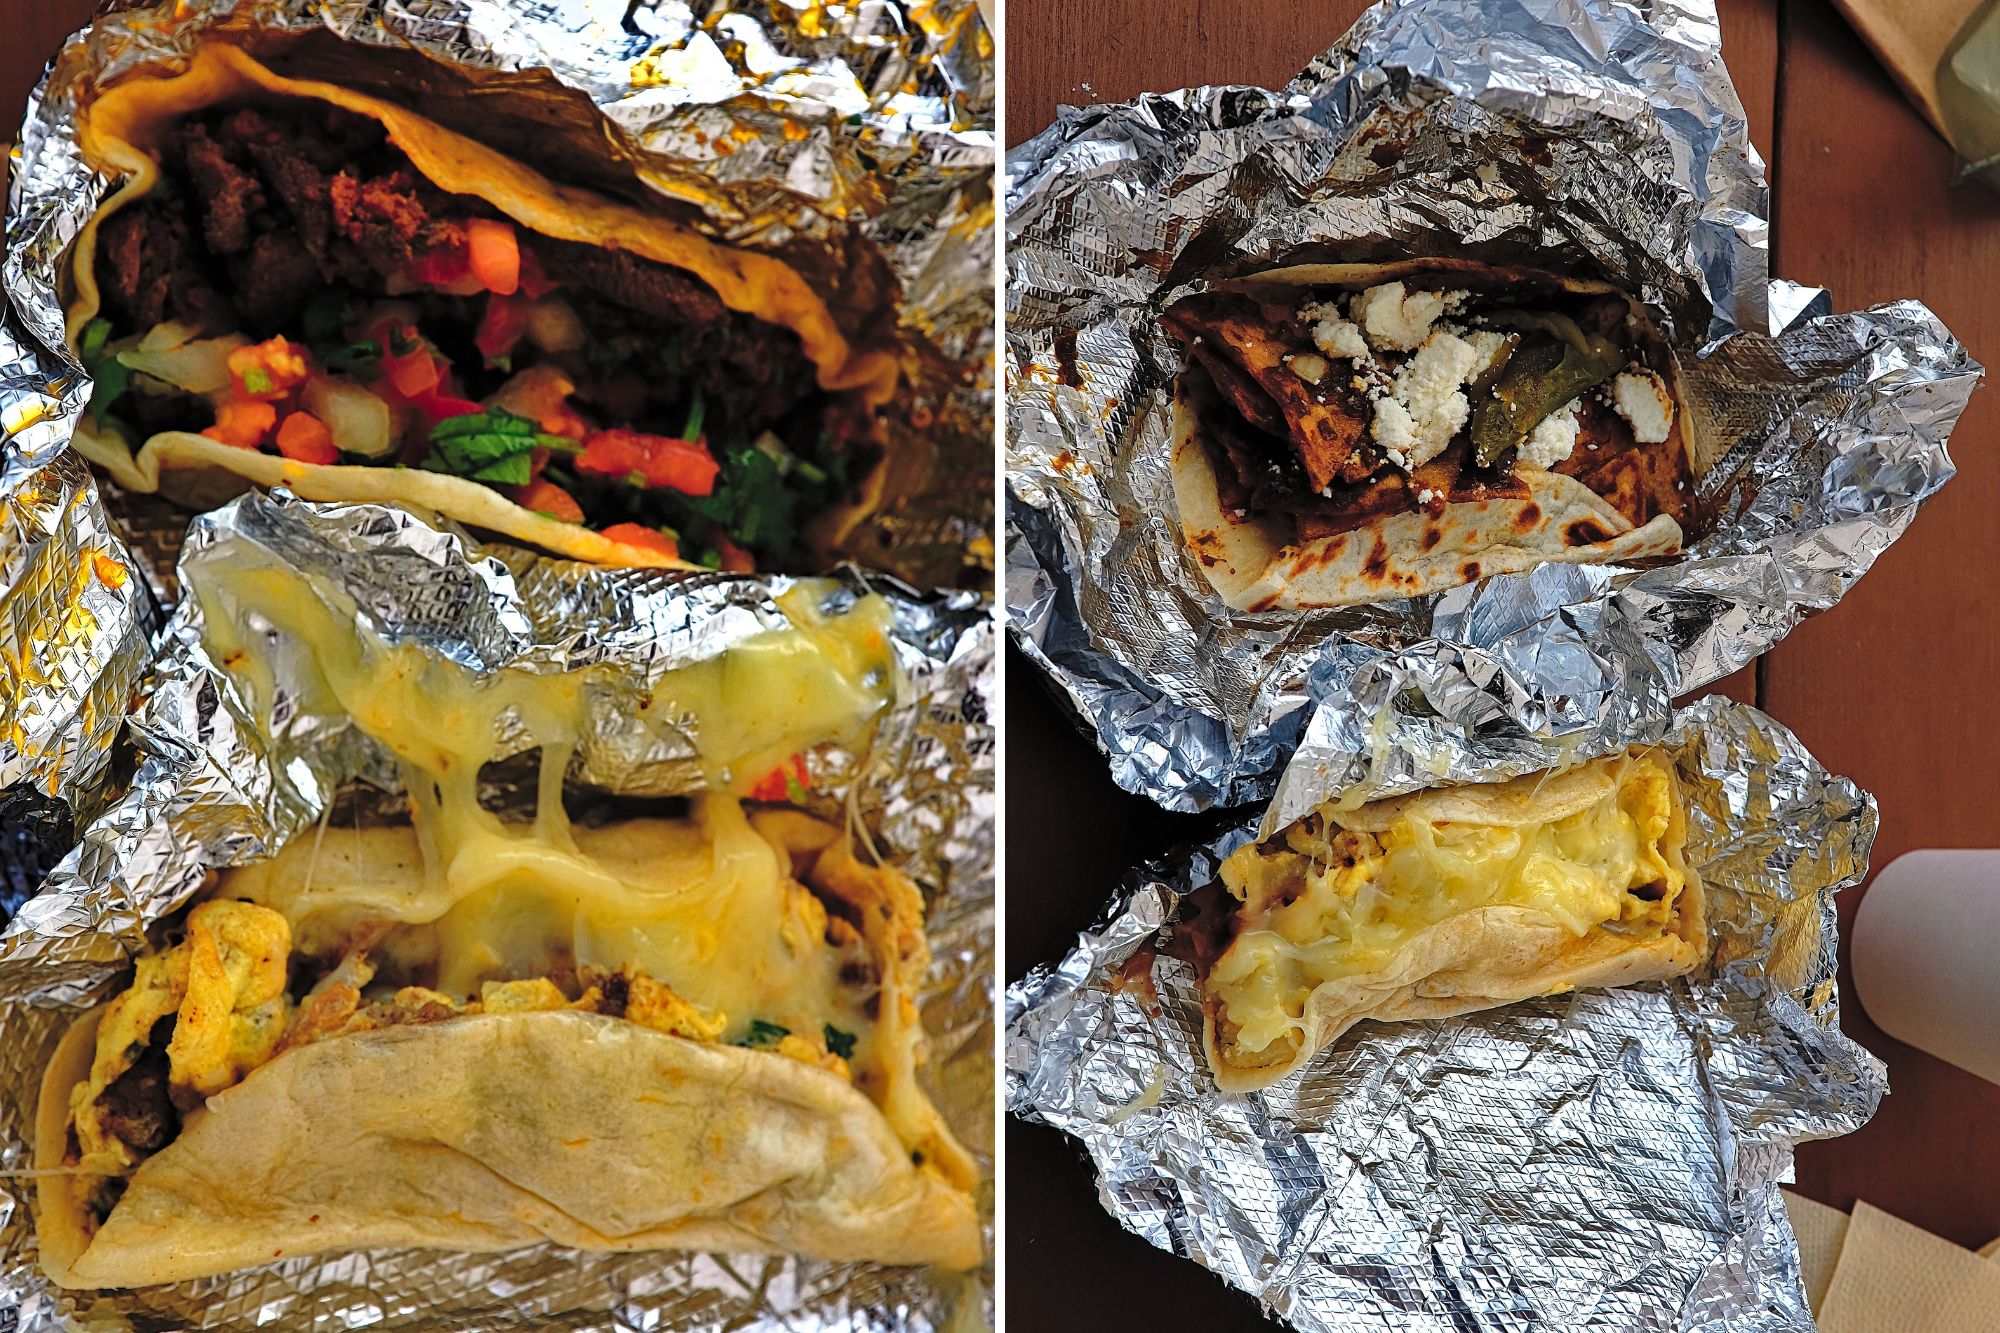 Four breakfast tacos from Granny's Tacos